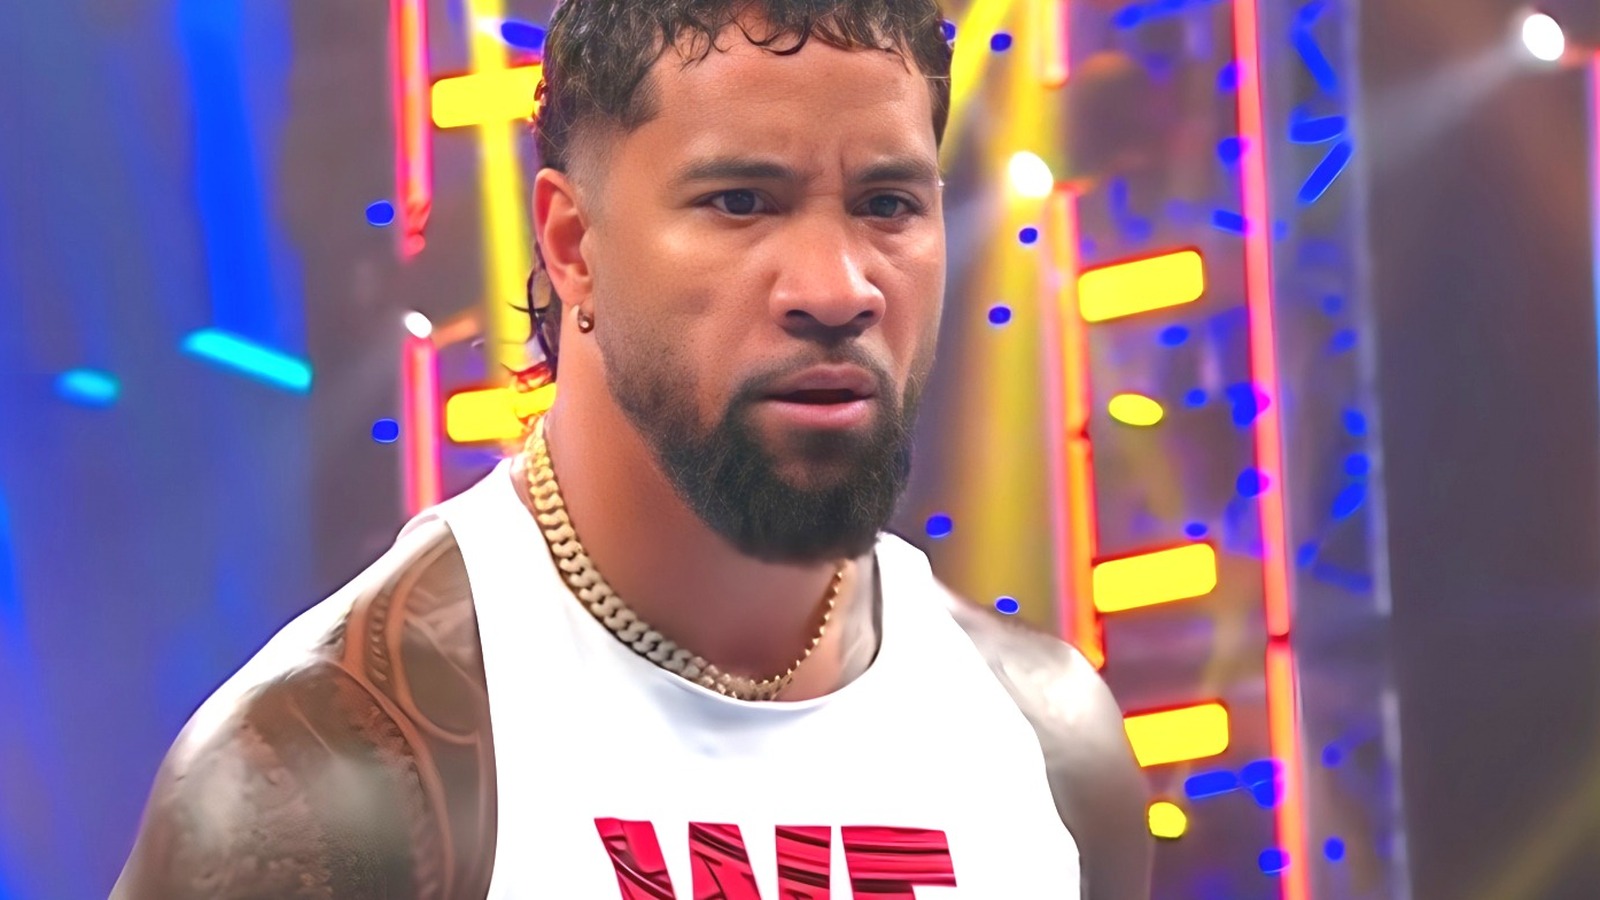 Jey Uso Leaves The Bloodline in Shocking WWE Twist, Fans Left Stunned and Mystified. 11